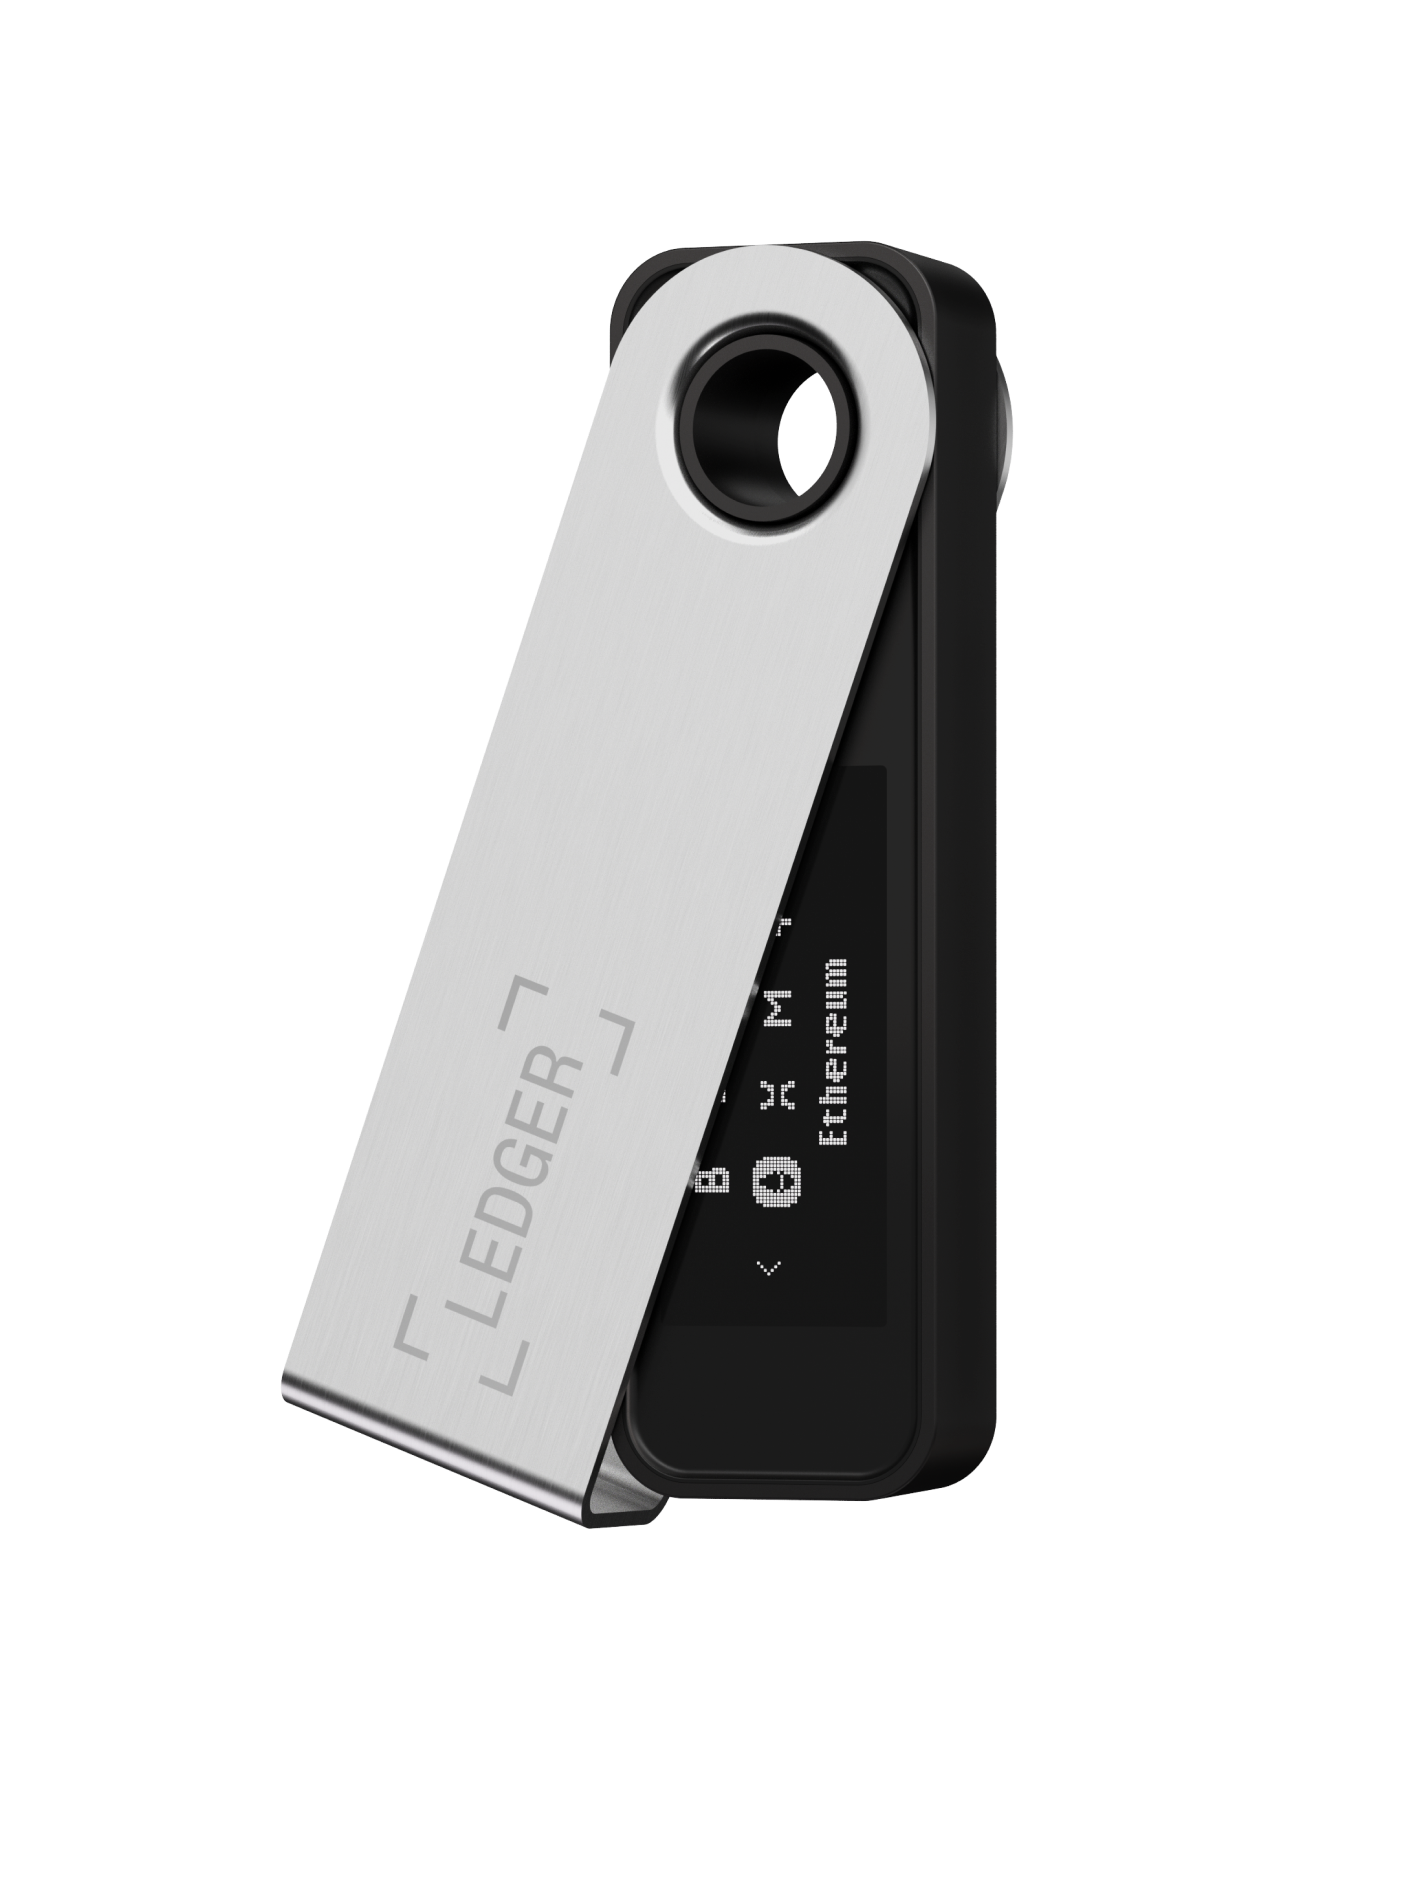 Ledger nano s plus is here. I have very little amount in btc but this still  is worth it : r/Bitcoin